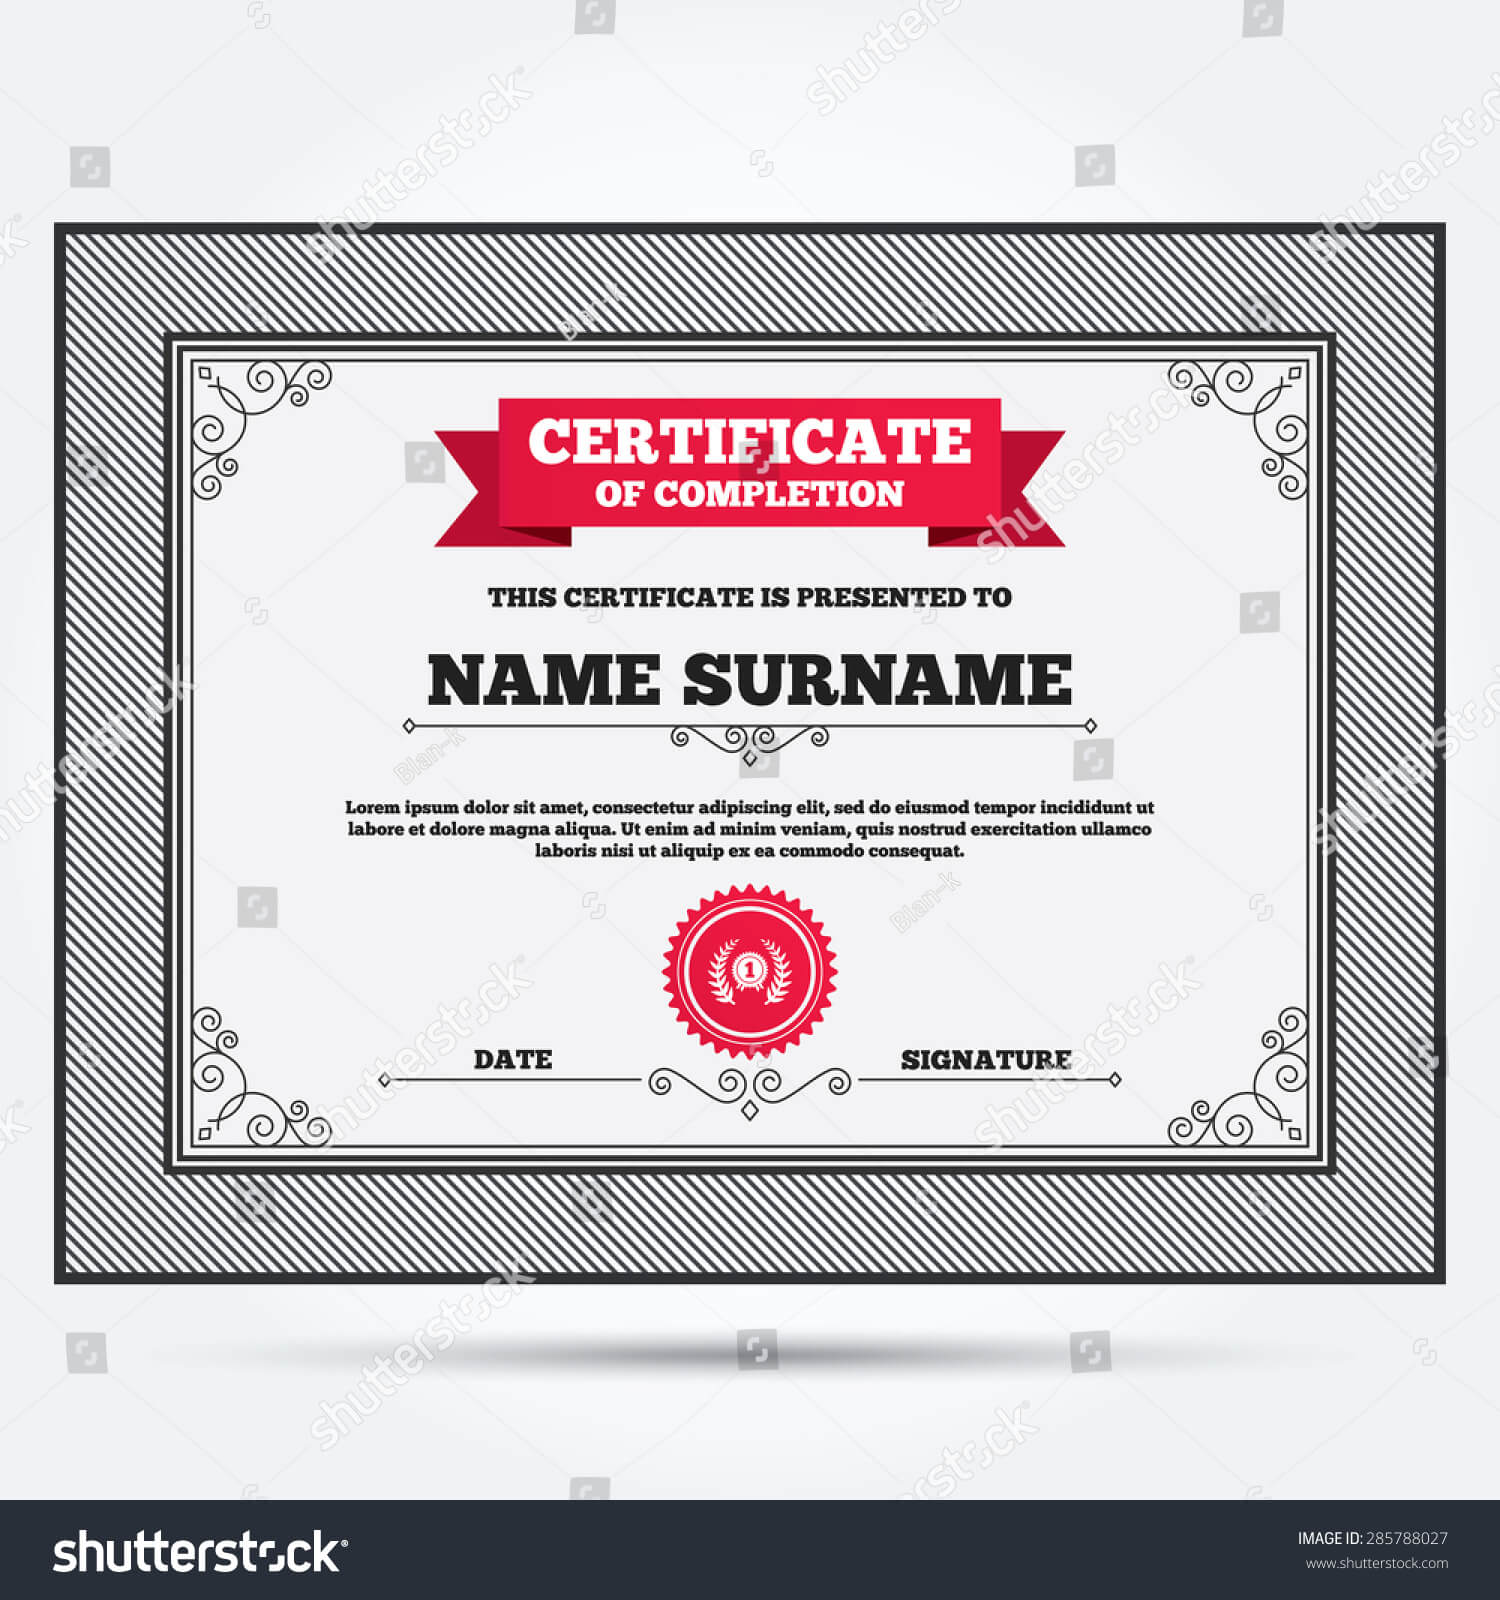 Certificate Completion First Place Award Sign Stock Vector Intended For First Place Award Certificate Template